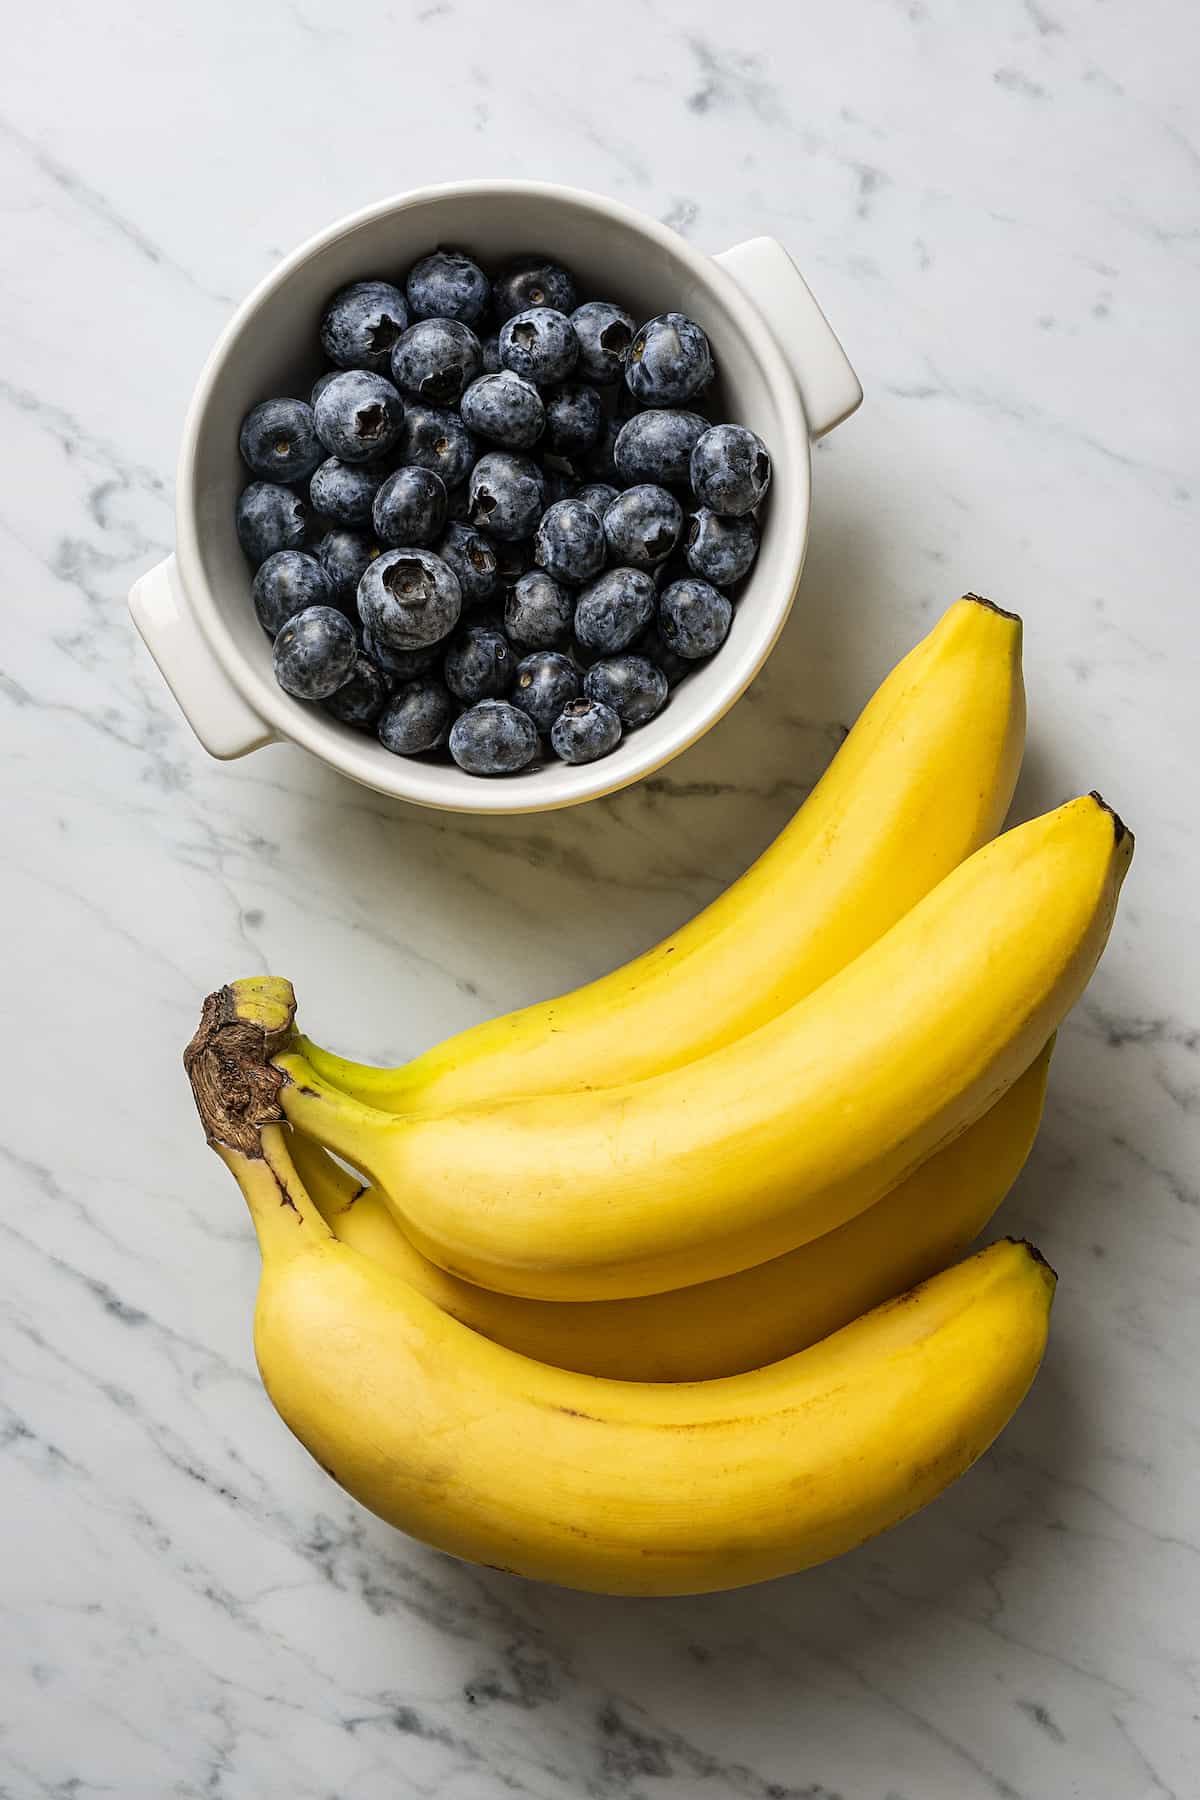 The ingredients for vegan blueberry ice cream: blueberries and bananas.